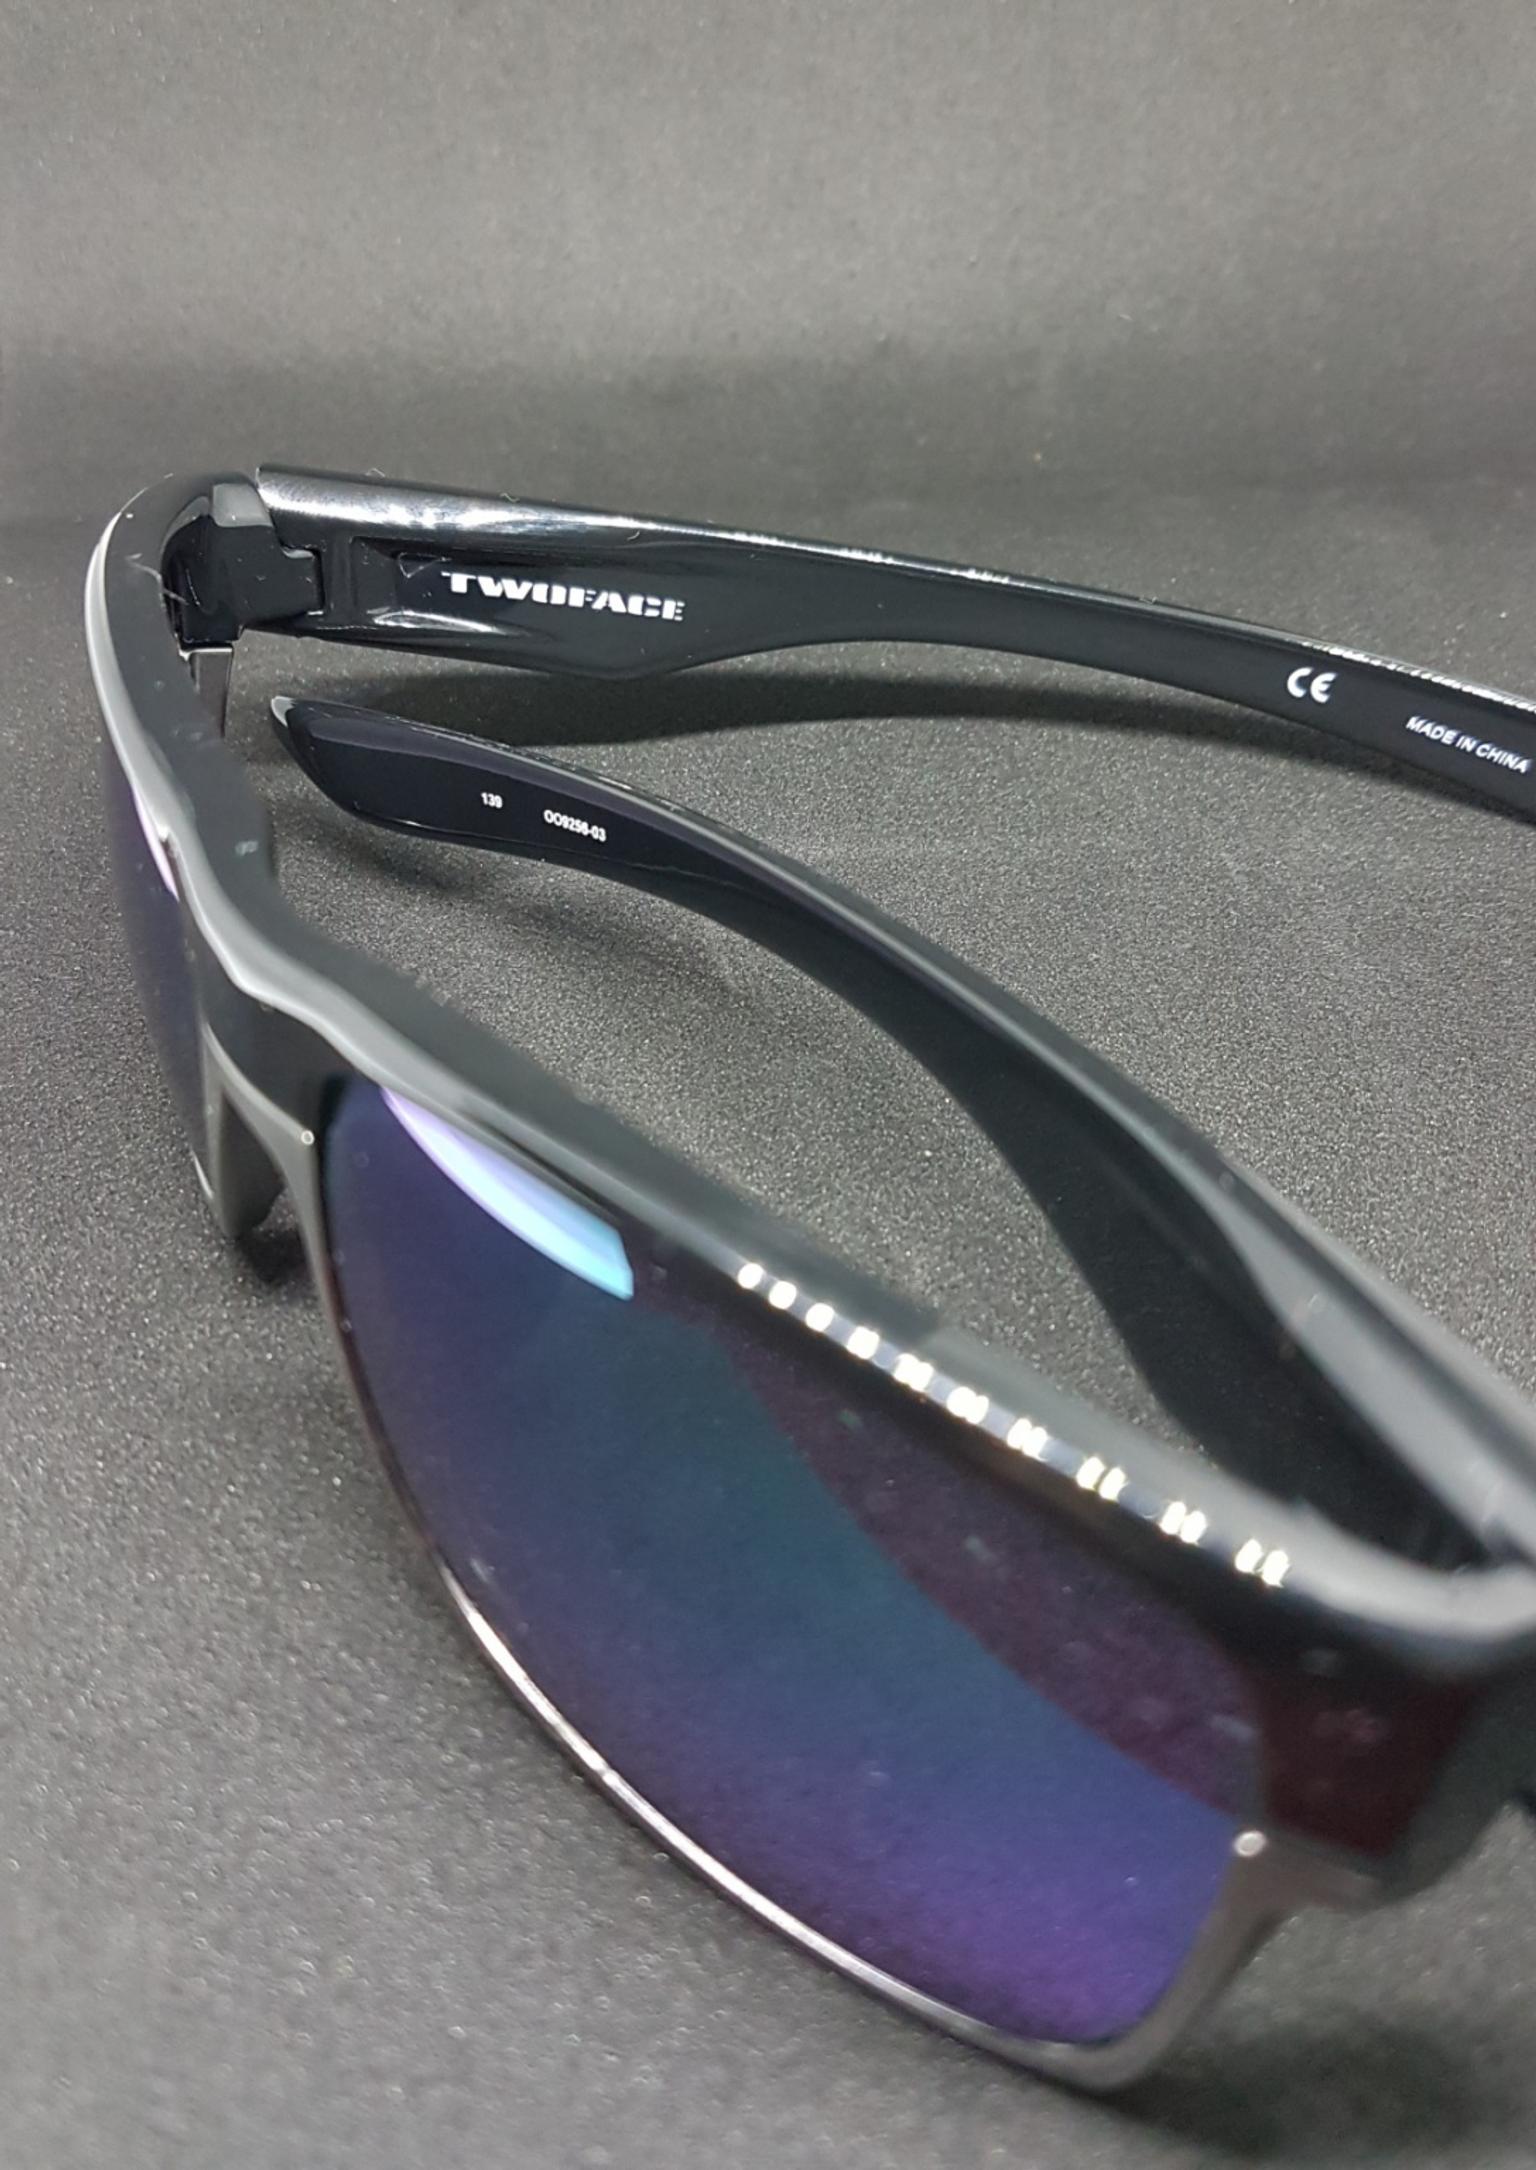 oakley made in china